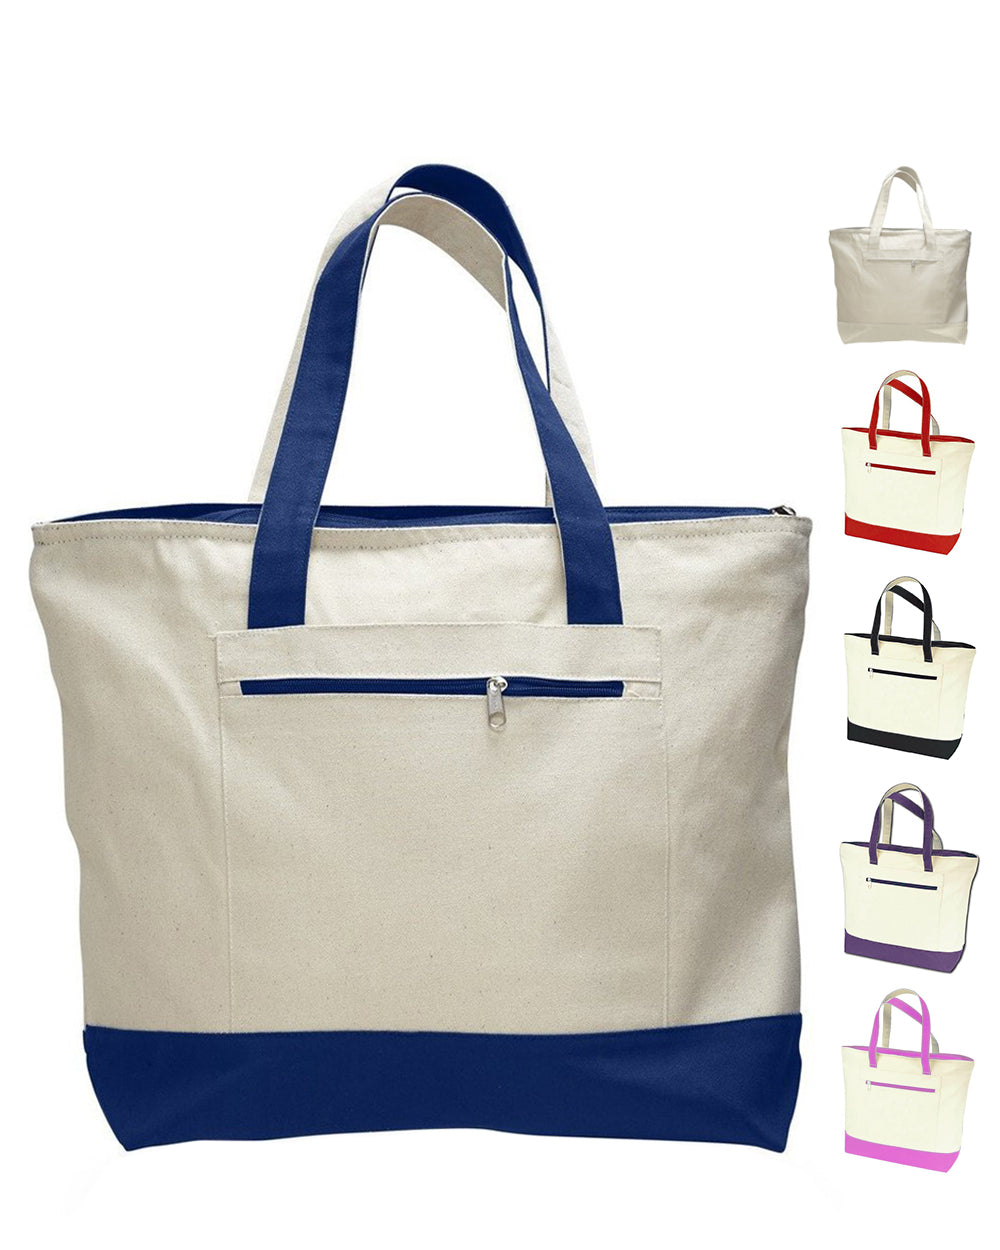 Heavy Canvas Tote Bags with Zipper for Shopping